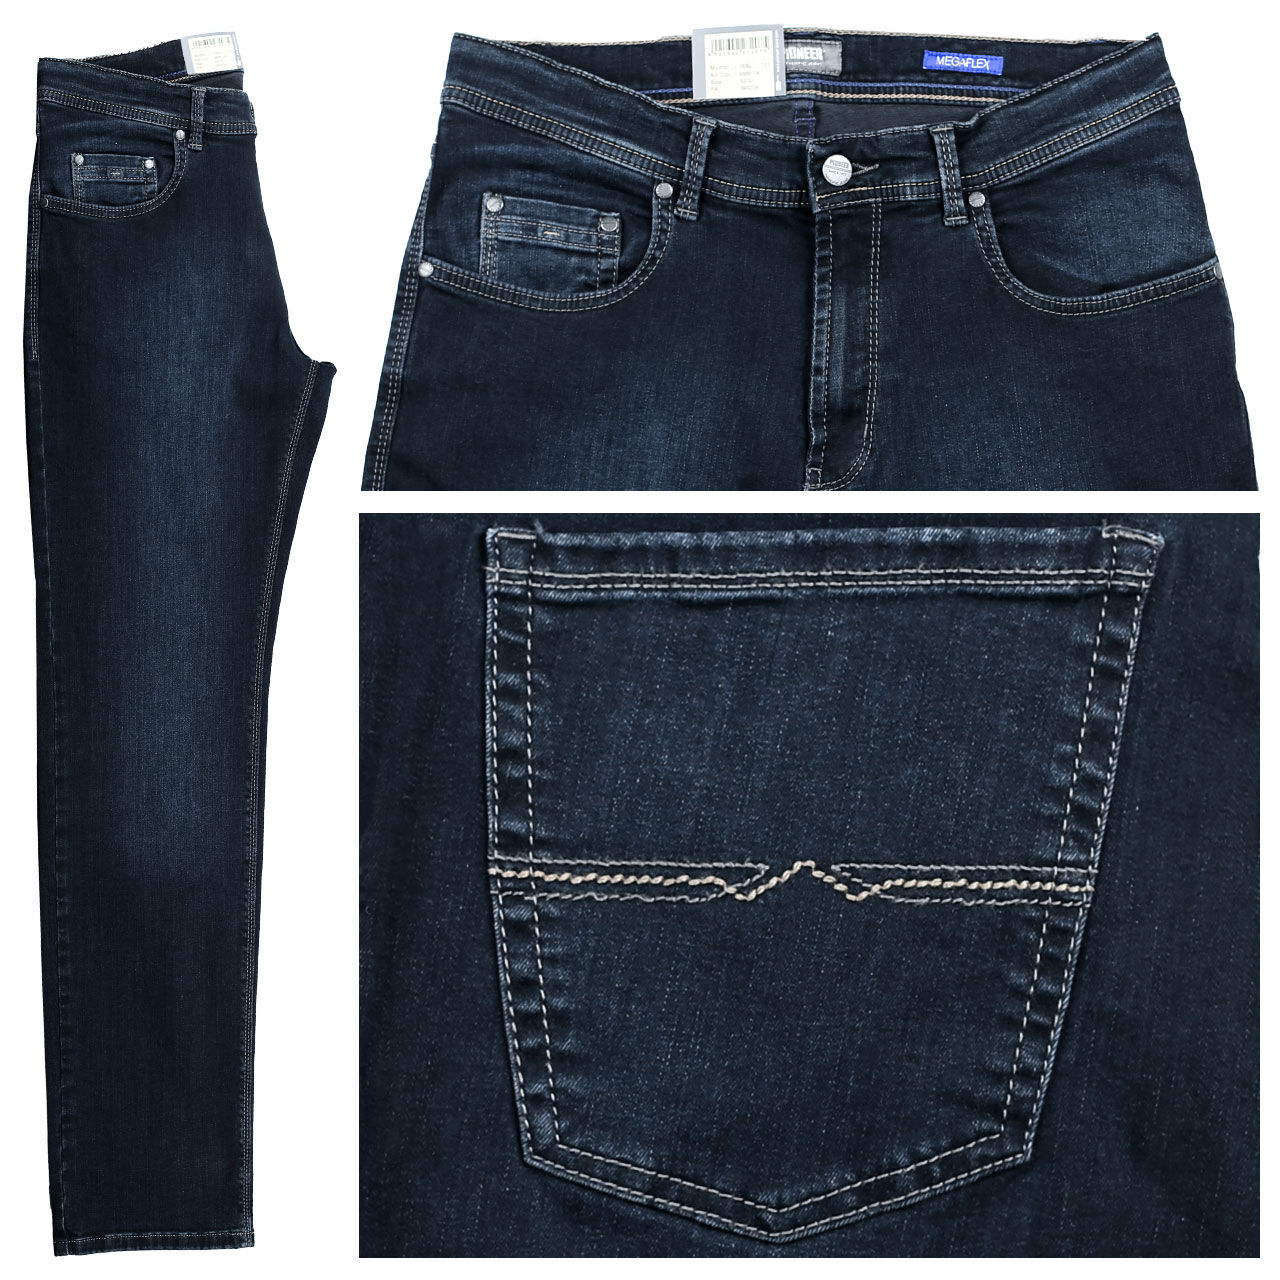 Pioneer Rando Jeans - Herrenjeans - Farbe: authentic blue washed - FarbNr.: 14 / 6802